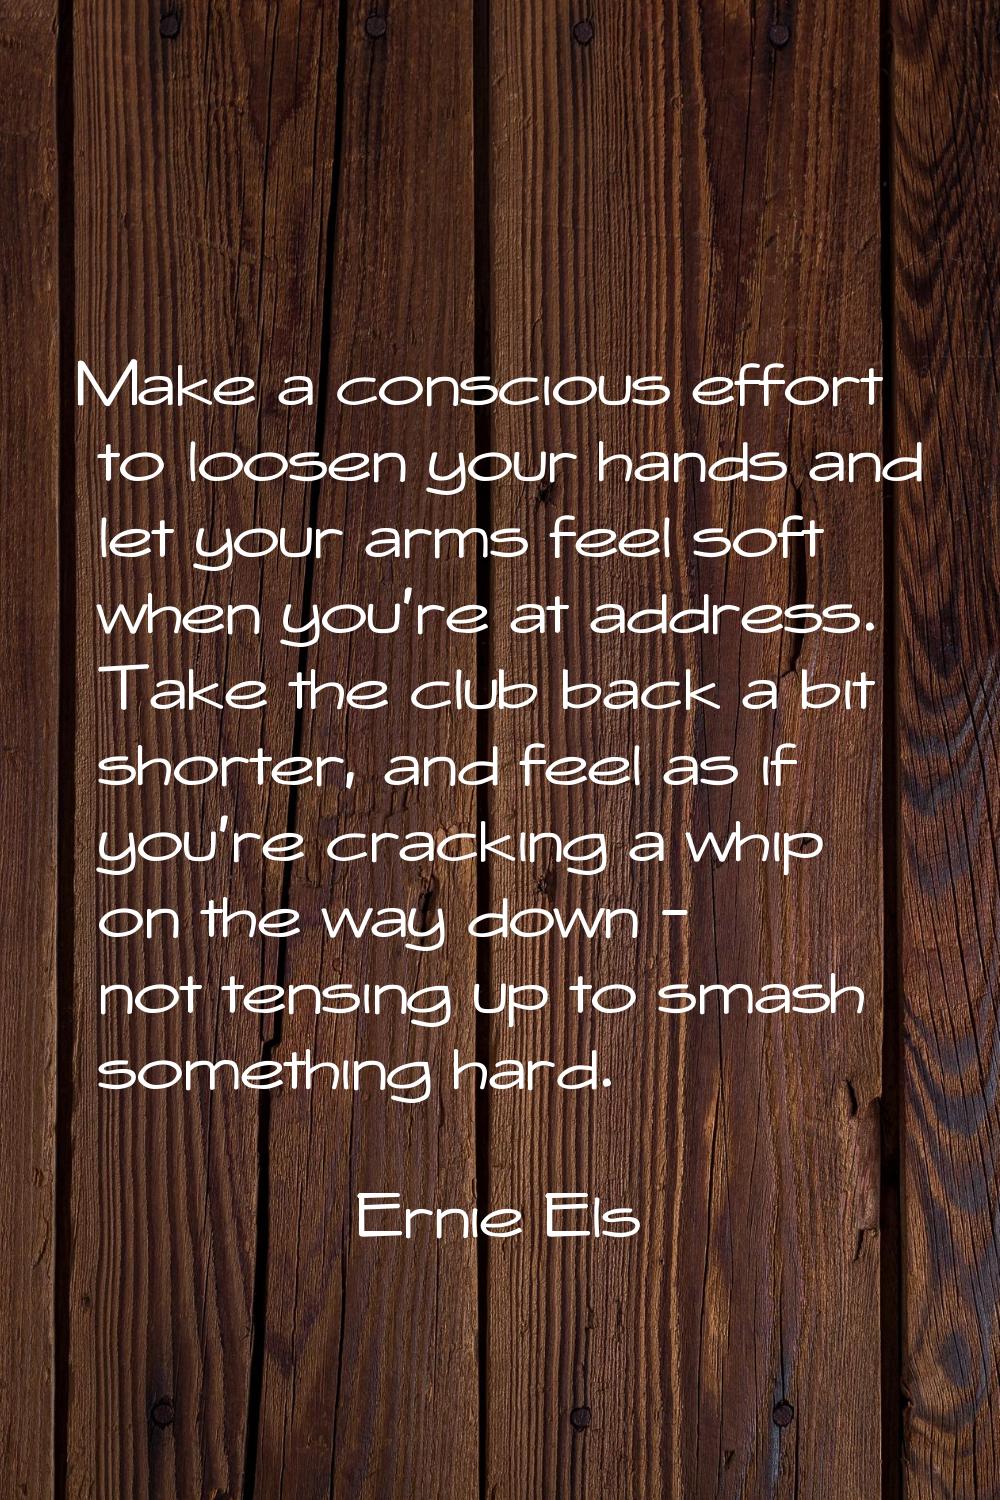 Make a conscious effort to loosen your hands and let your arms feel soft when you're at address. Ta